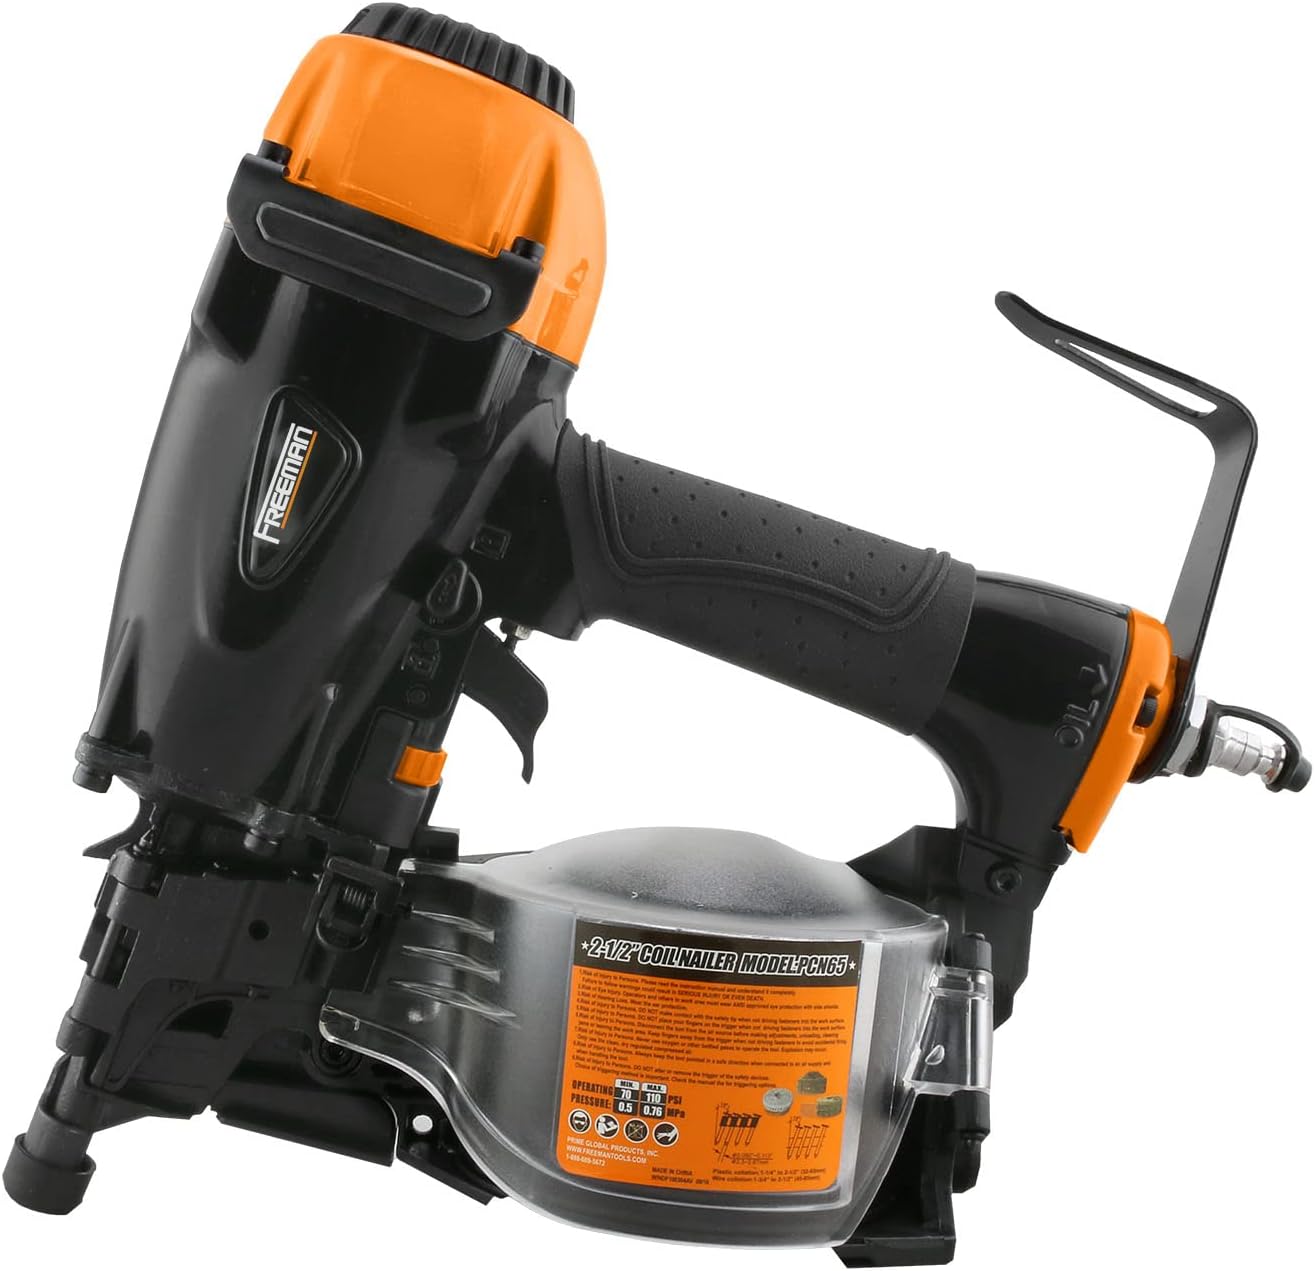 Looking to Buy The Freeman PCN65 Coil Siding Nailer. Read This First